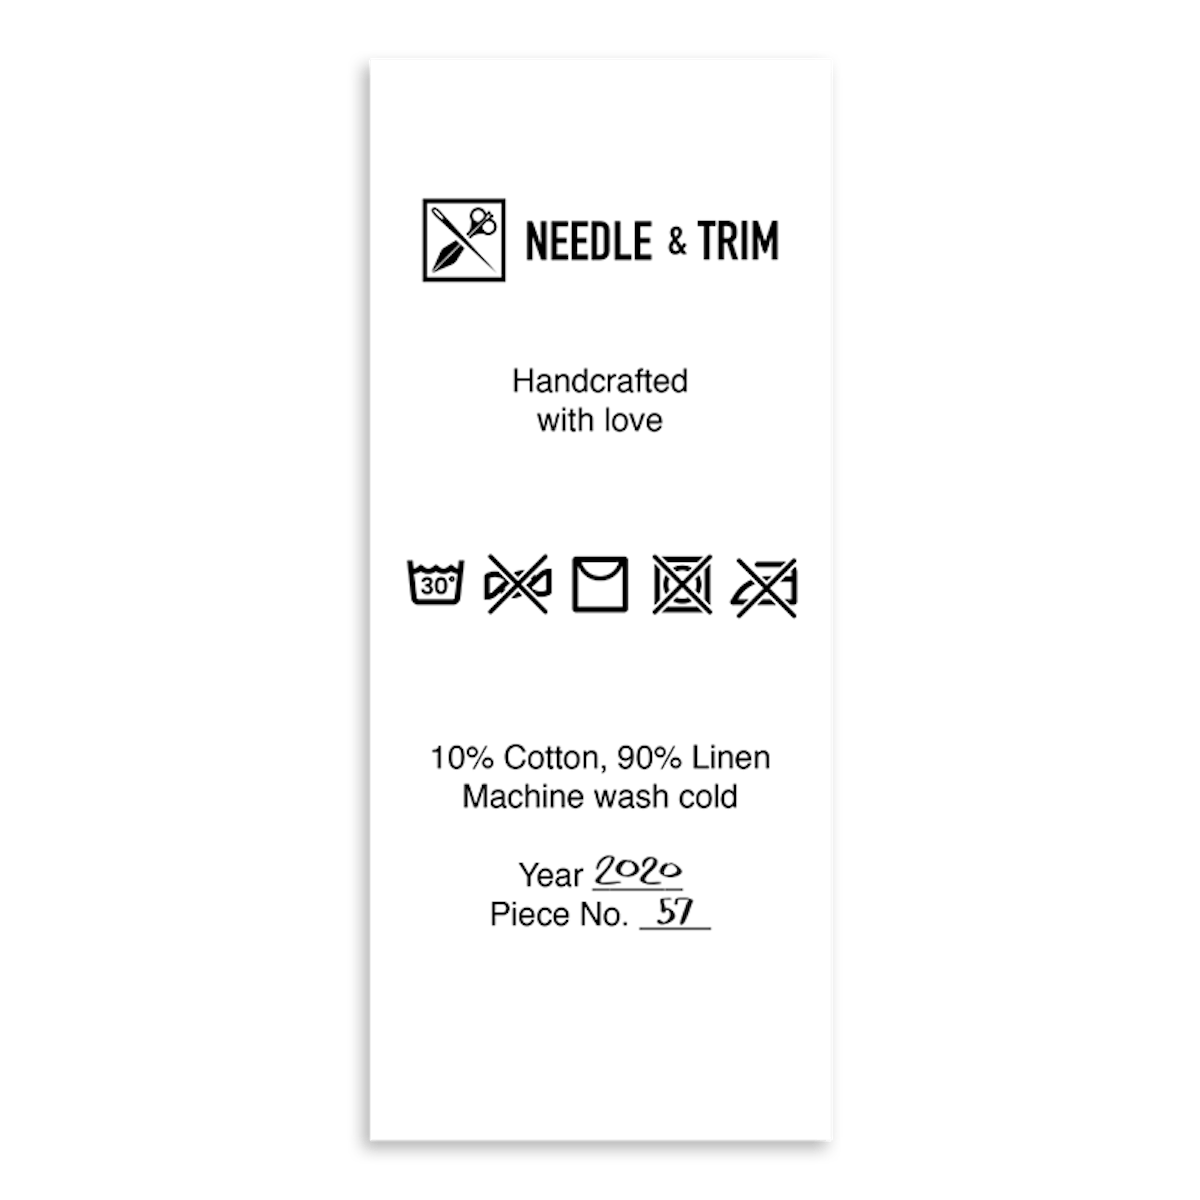 What does category c mean on the clothes hang tag?